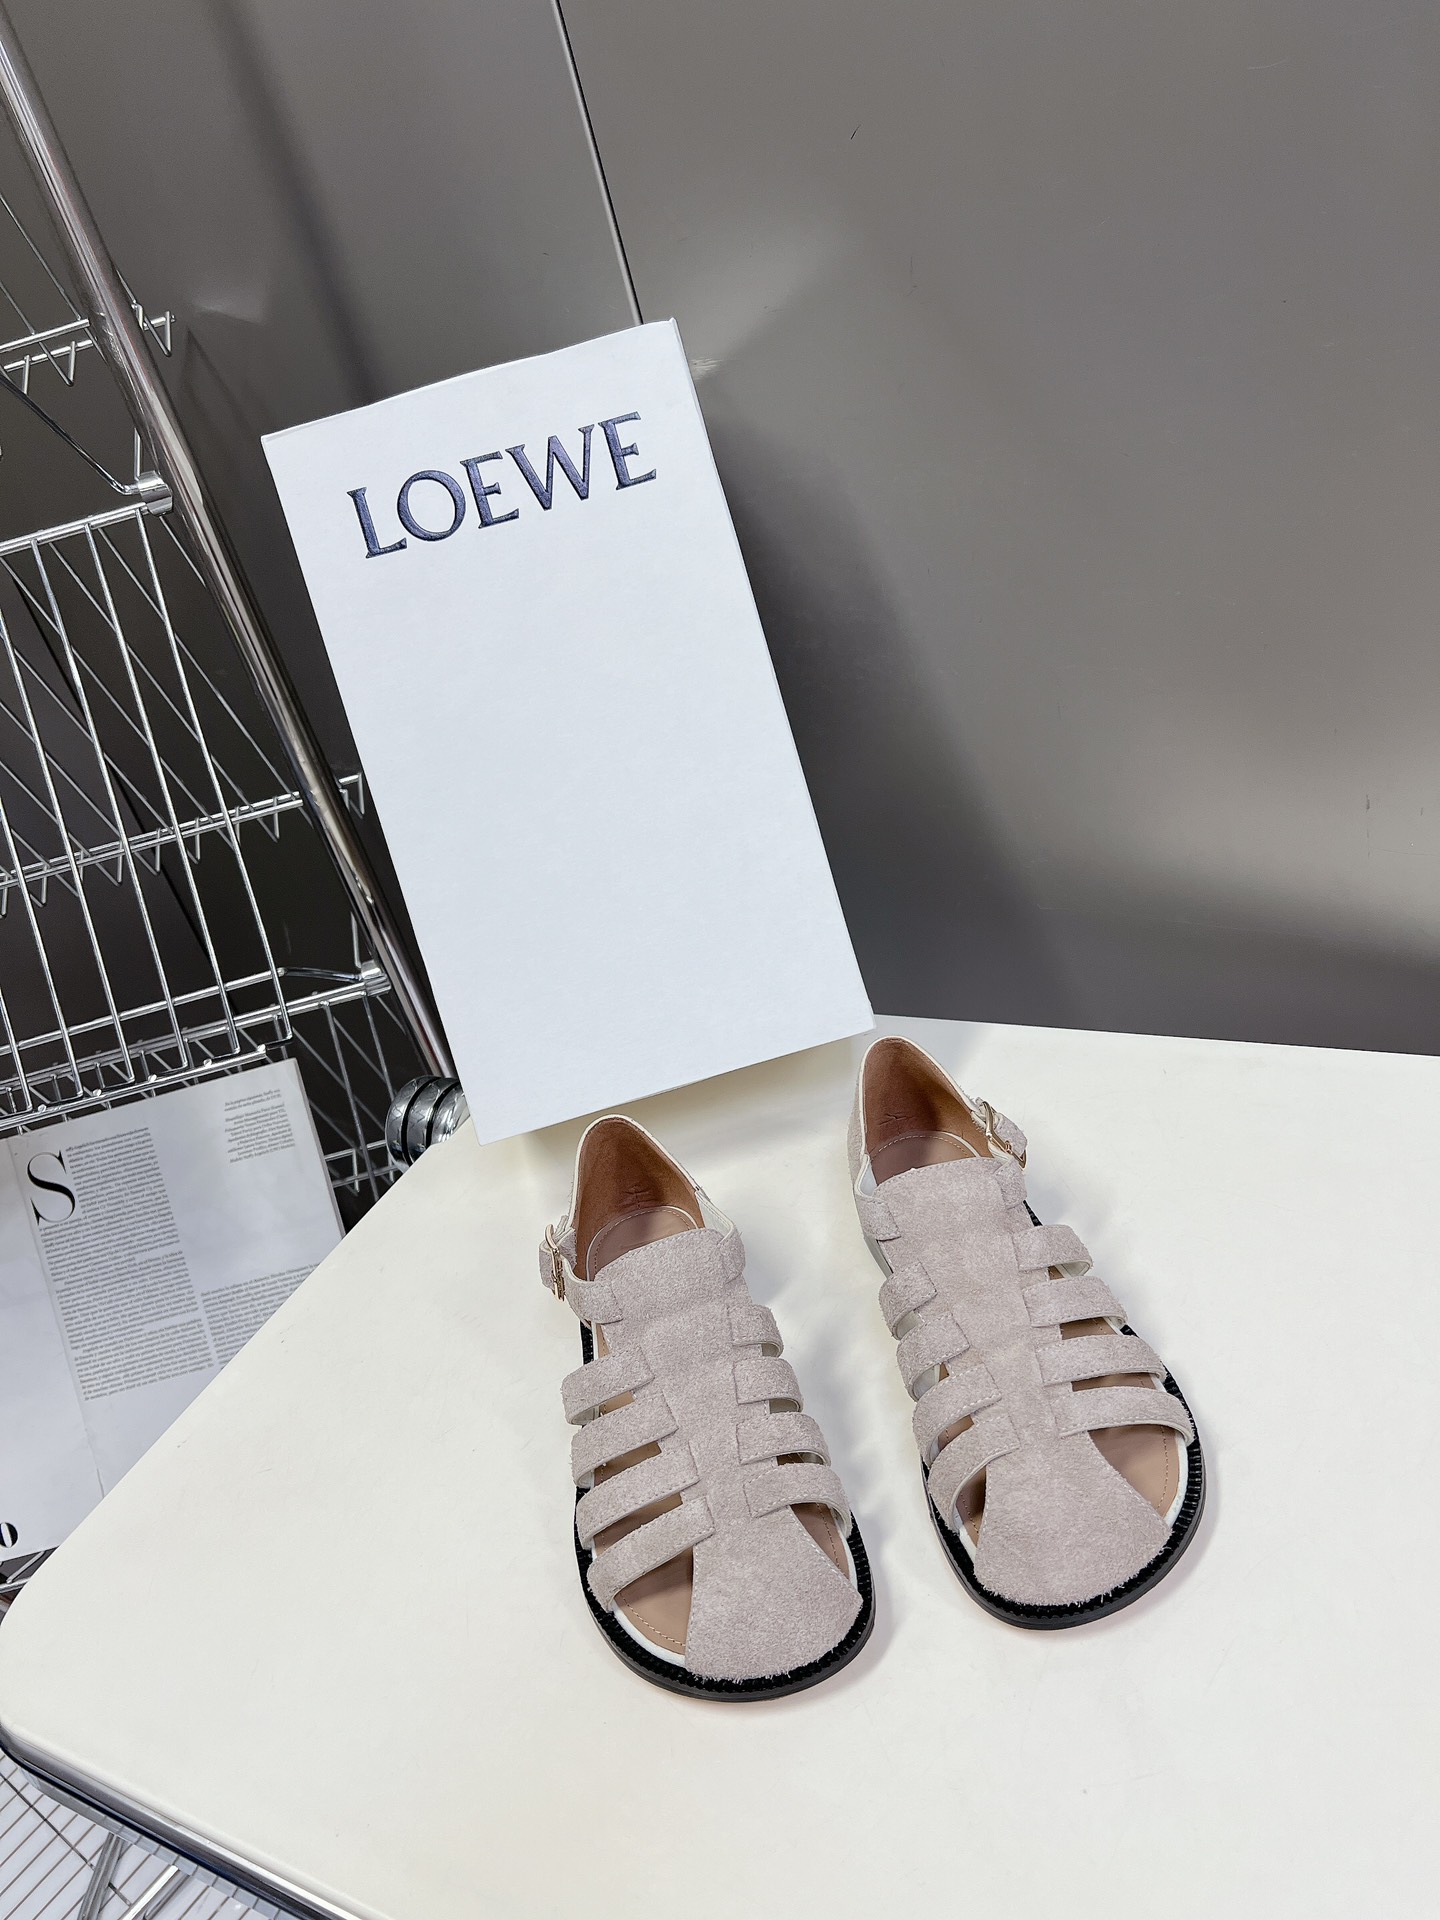 Loewe Shoes Loafers Mules Genuine Leather Spring Collection Vintage